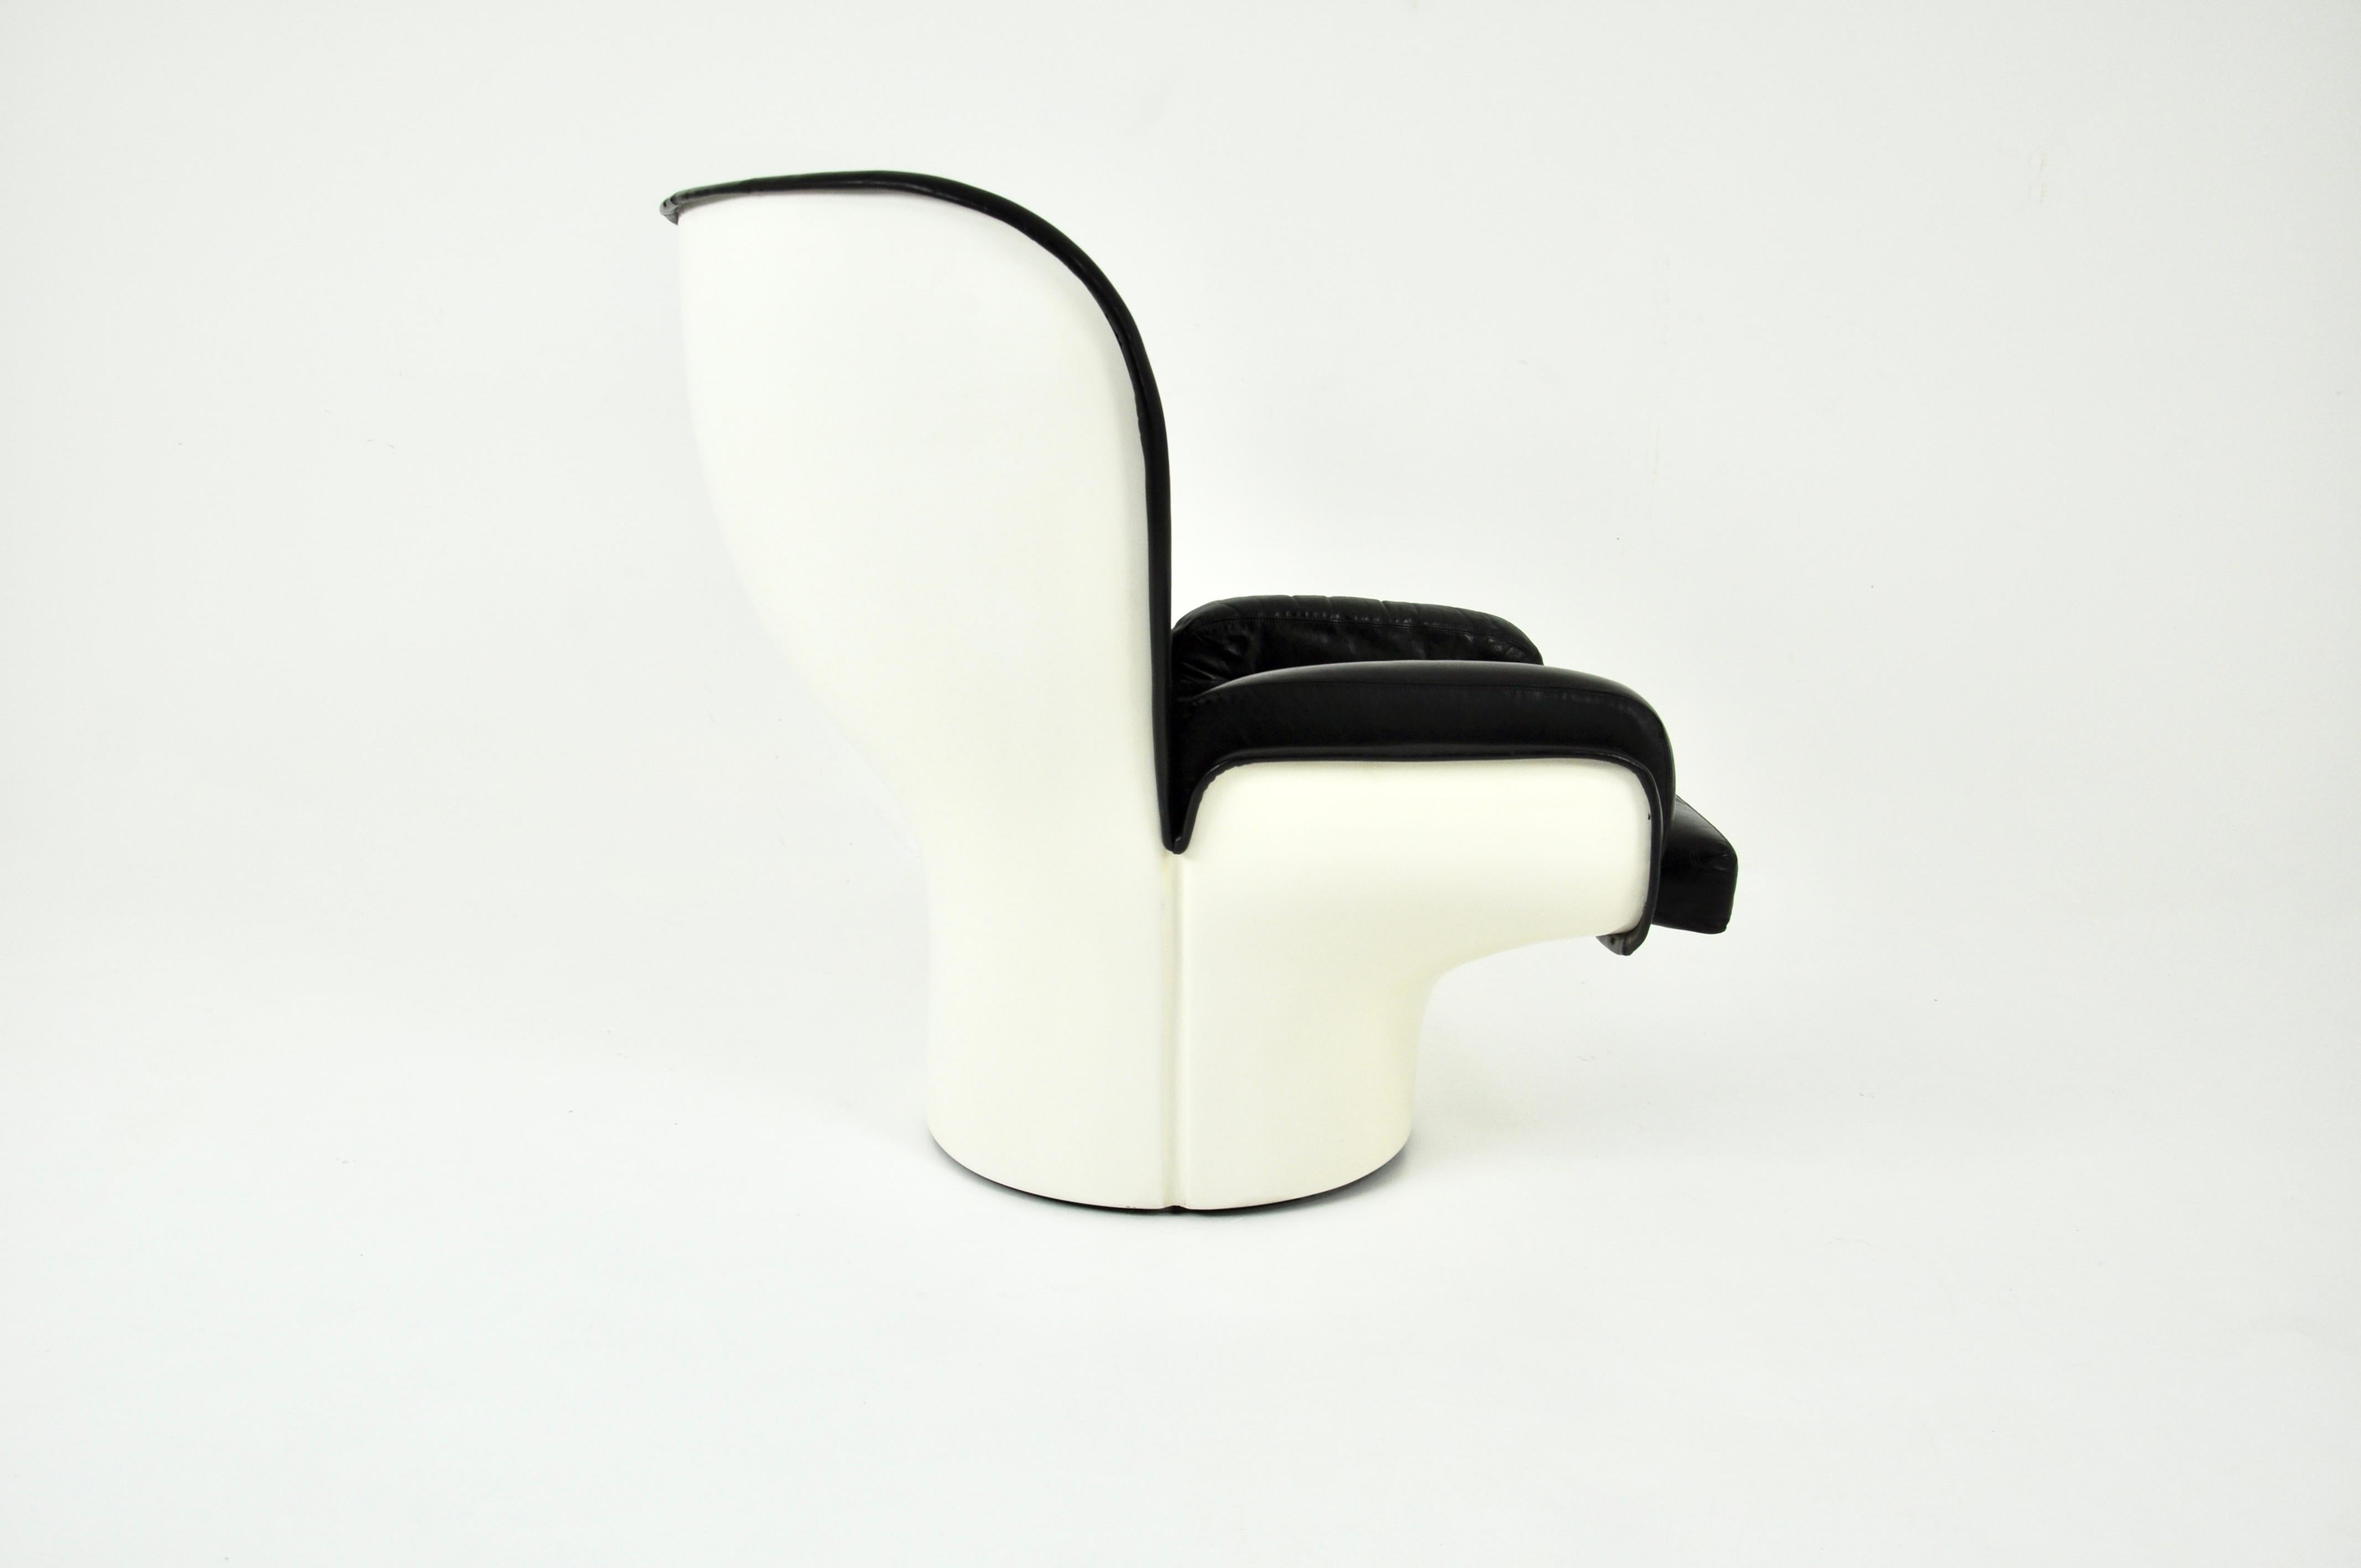 Elda Lounge Chair by Joe Colombo for Comfort, Italy, 1960s In Good Condition For Sale In Lasne, BE